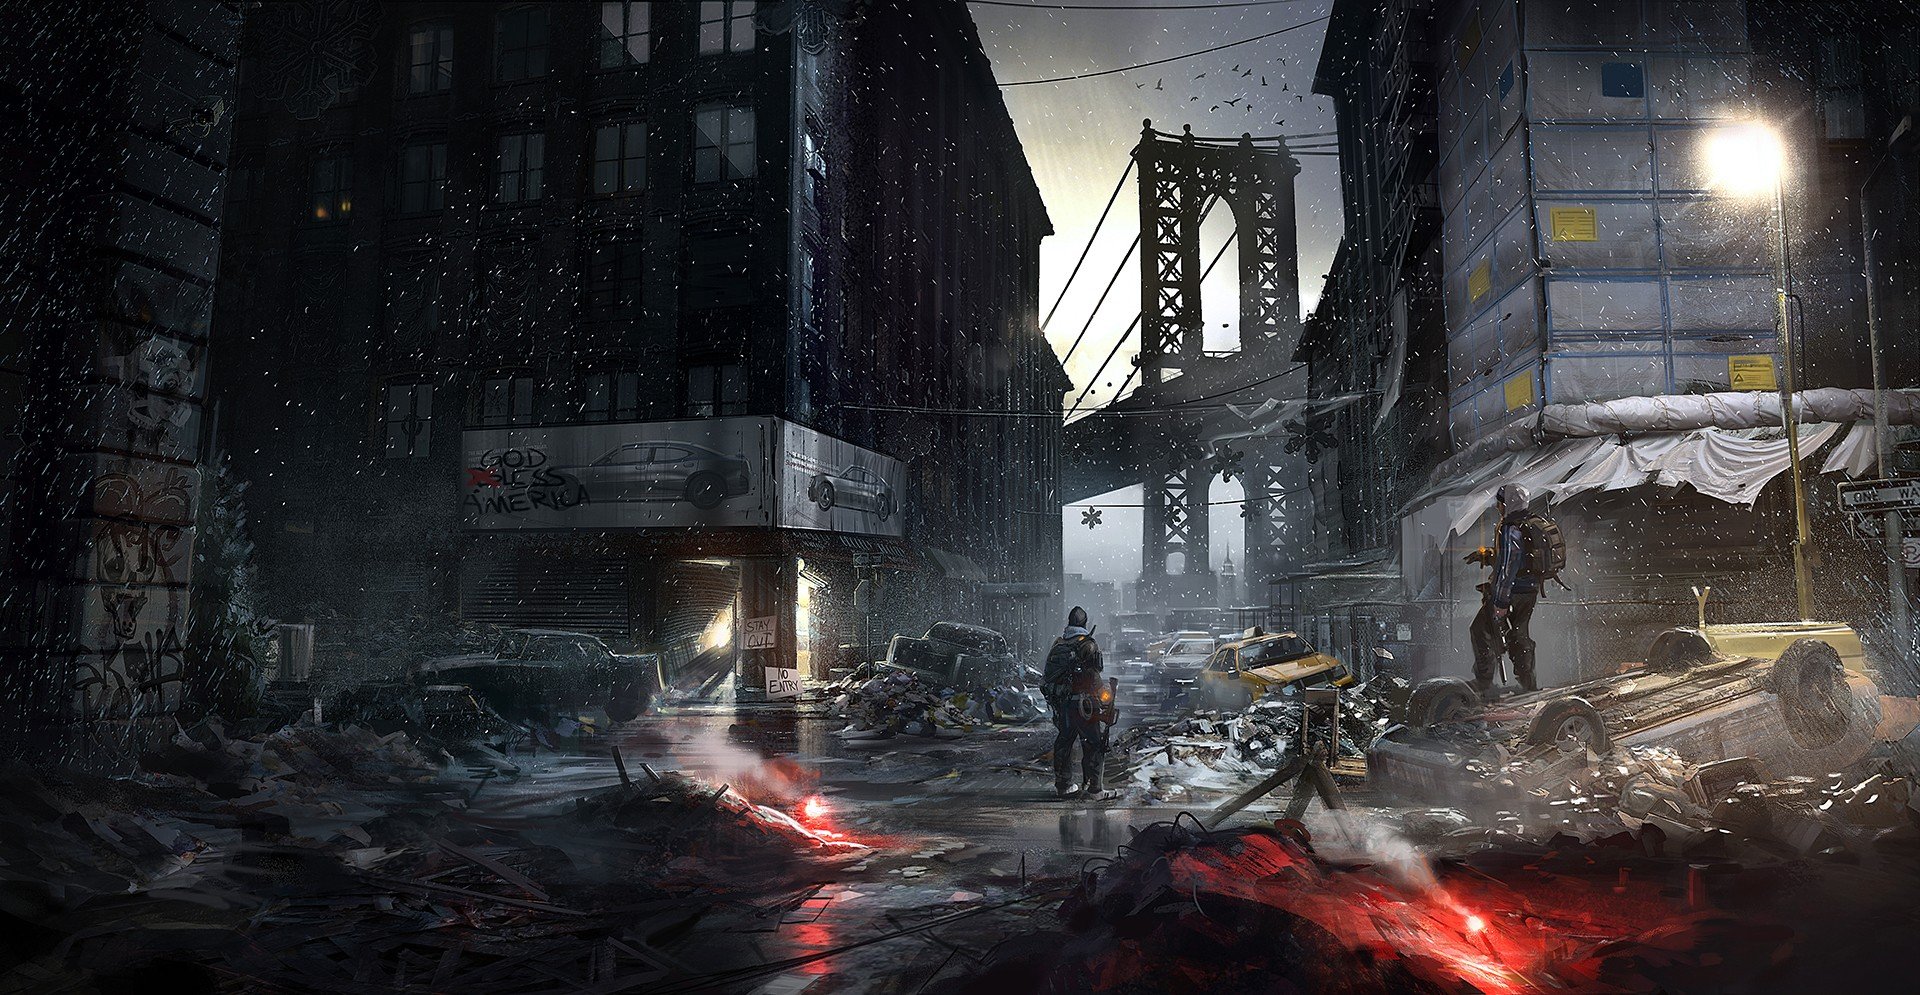 Tom Clancys The Division, Computer game, Concept art Wallpaper